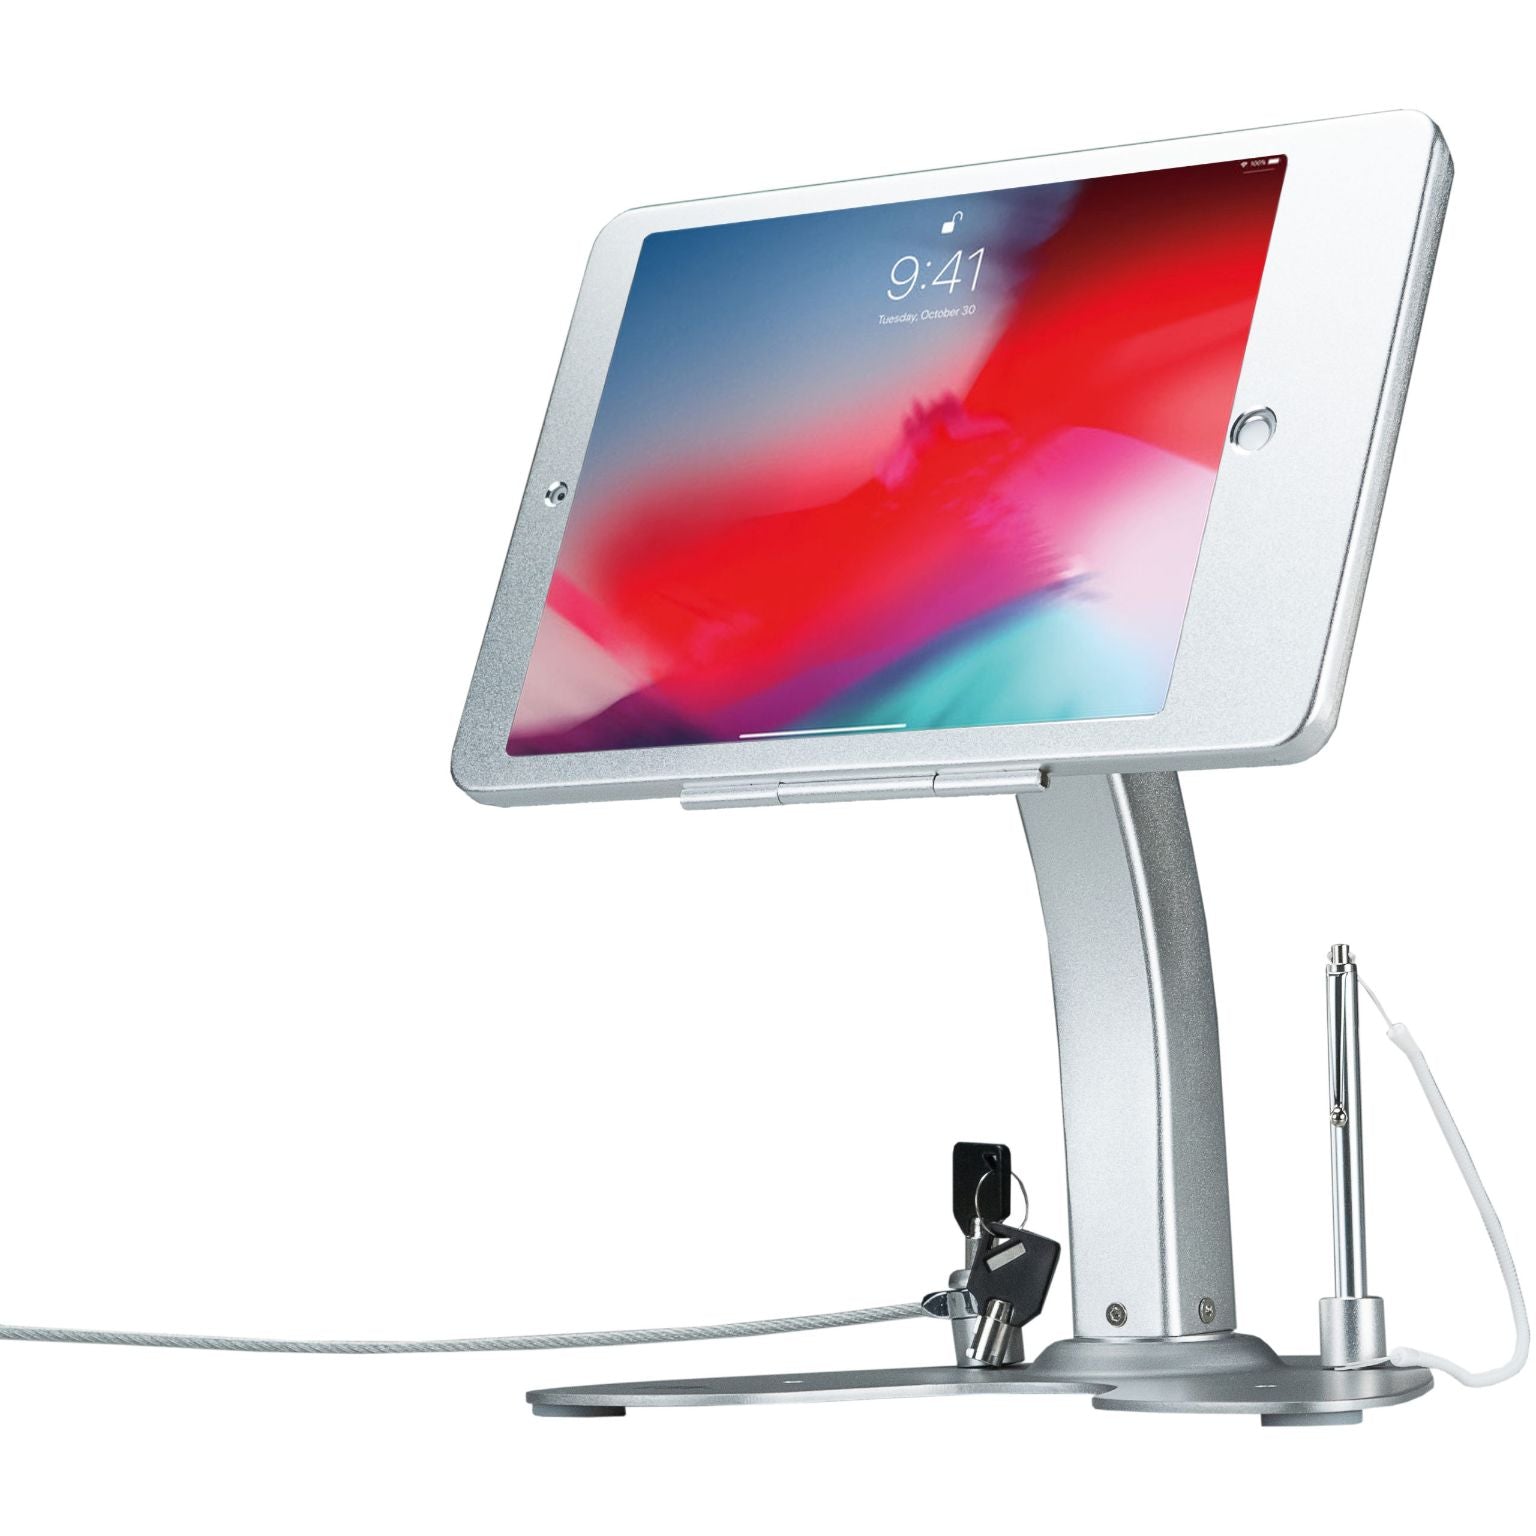 Dual Security Kiosk Stand with Locking Case and Cable for iPad Pro 10.5 and iPad Air Gen. 3